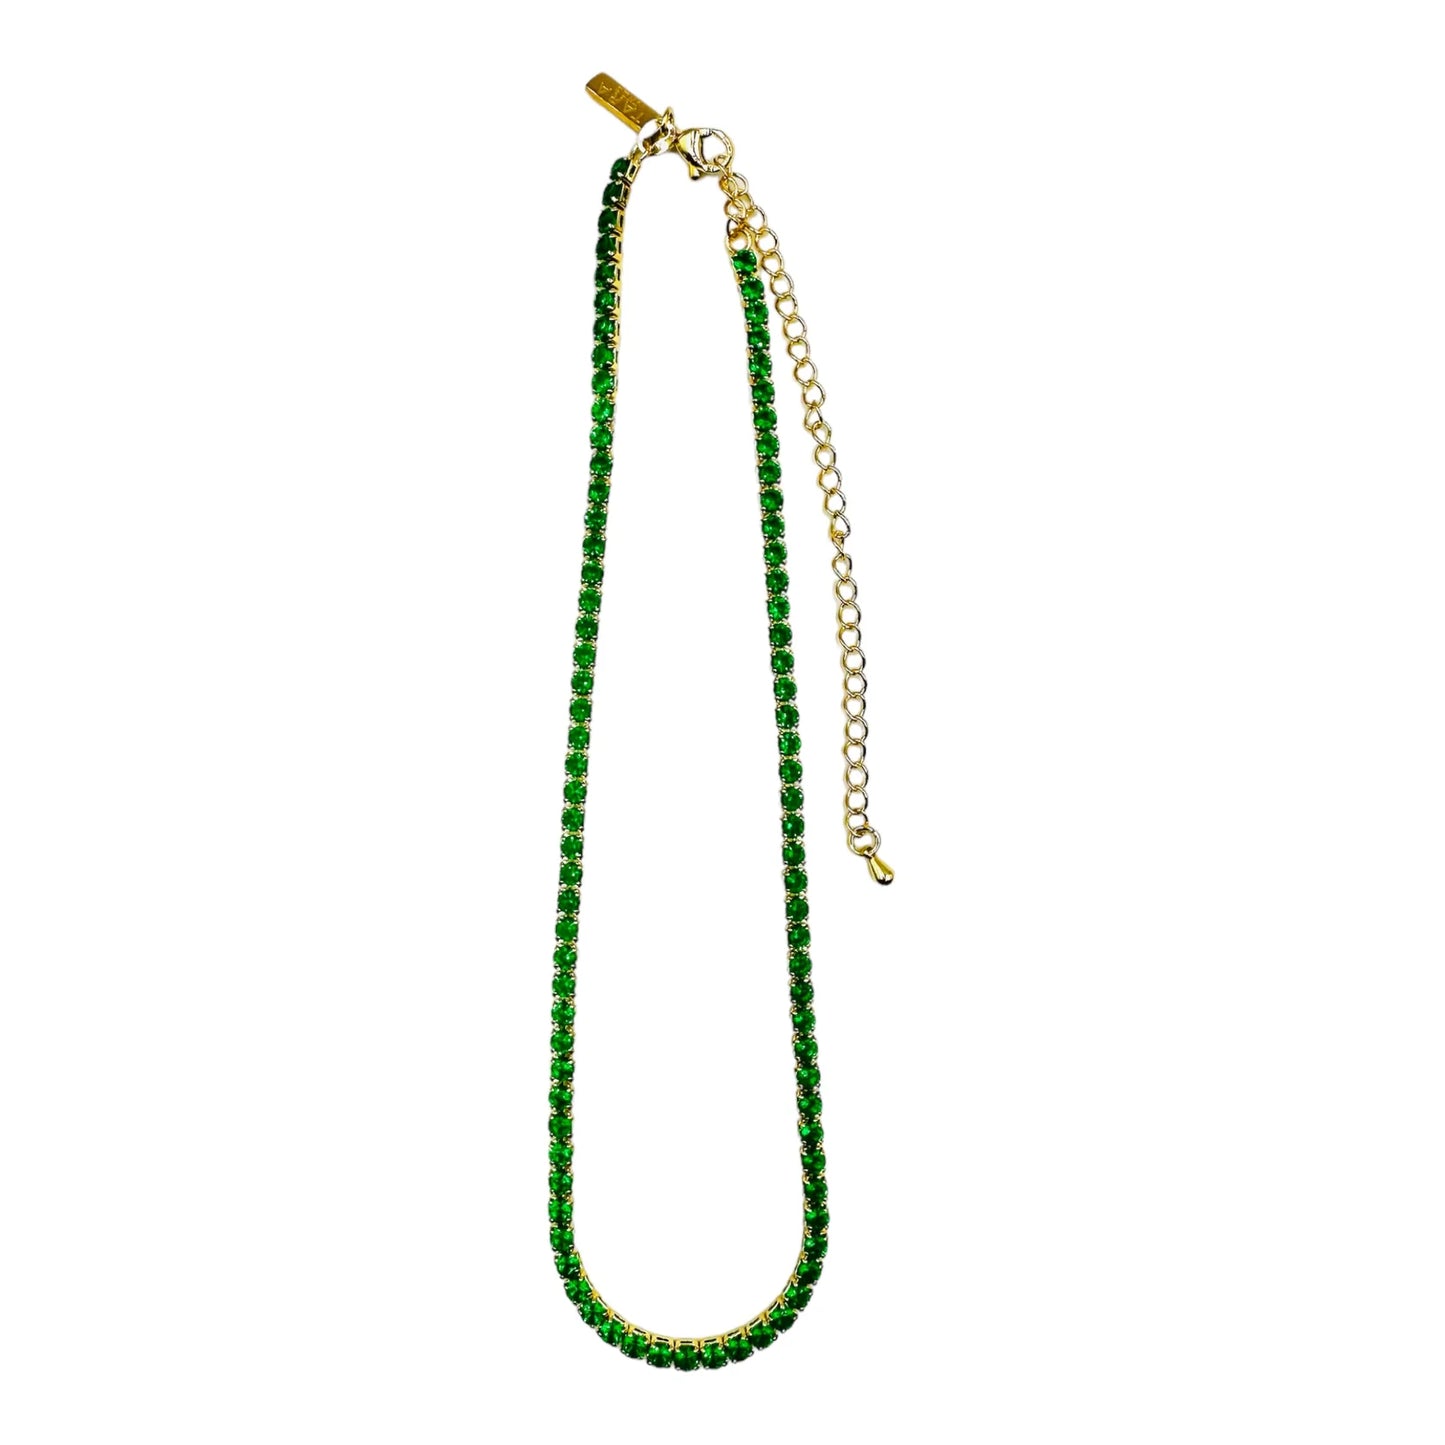 NECKLACE TENNIS - green